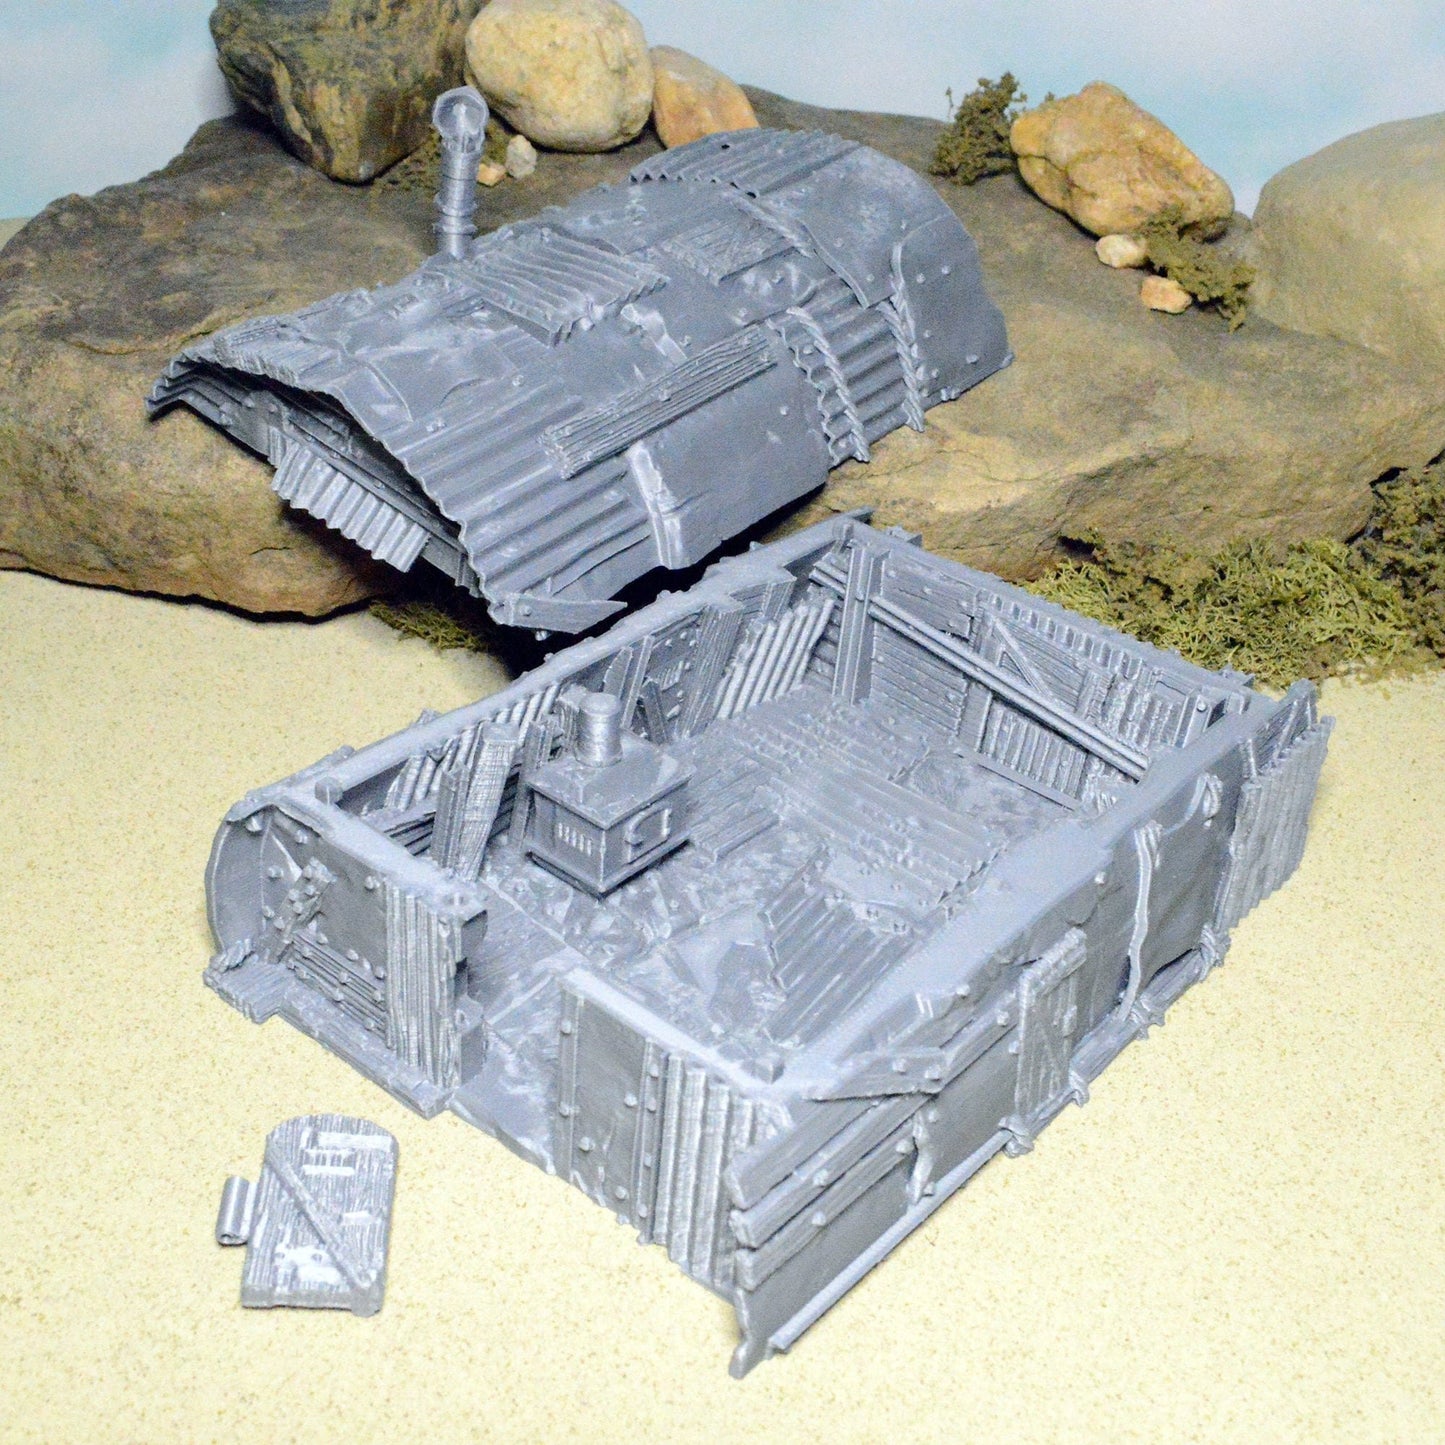 Isolation Bunker 15mm 20mm 28mm 32mm for Gaslands Terrain, Fallout Urban Post Apocalyptic Wasteland Shelter